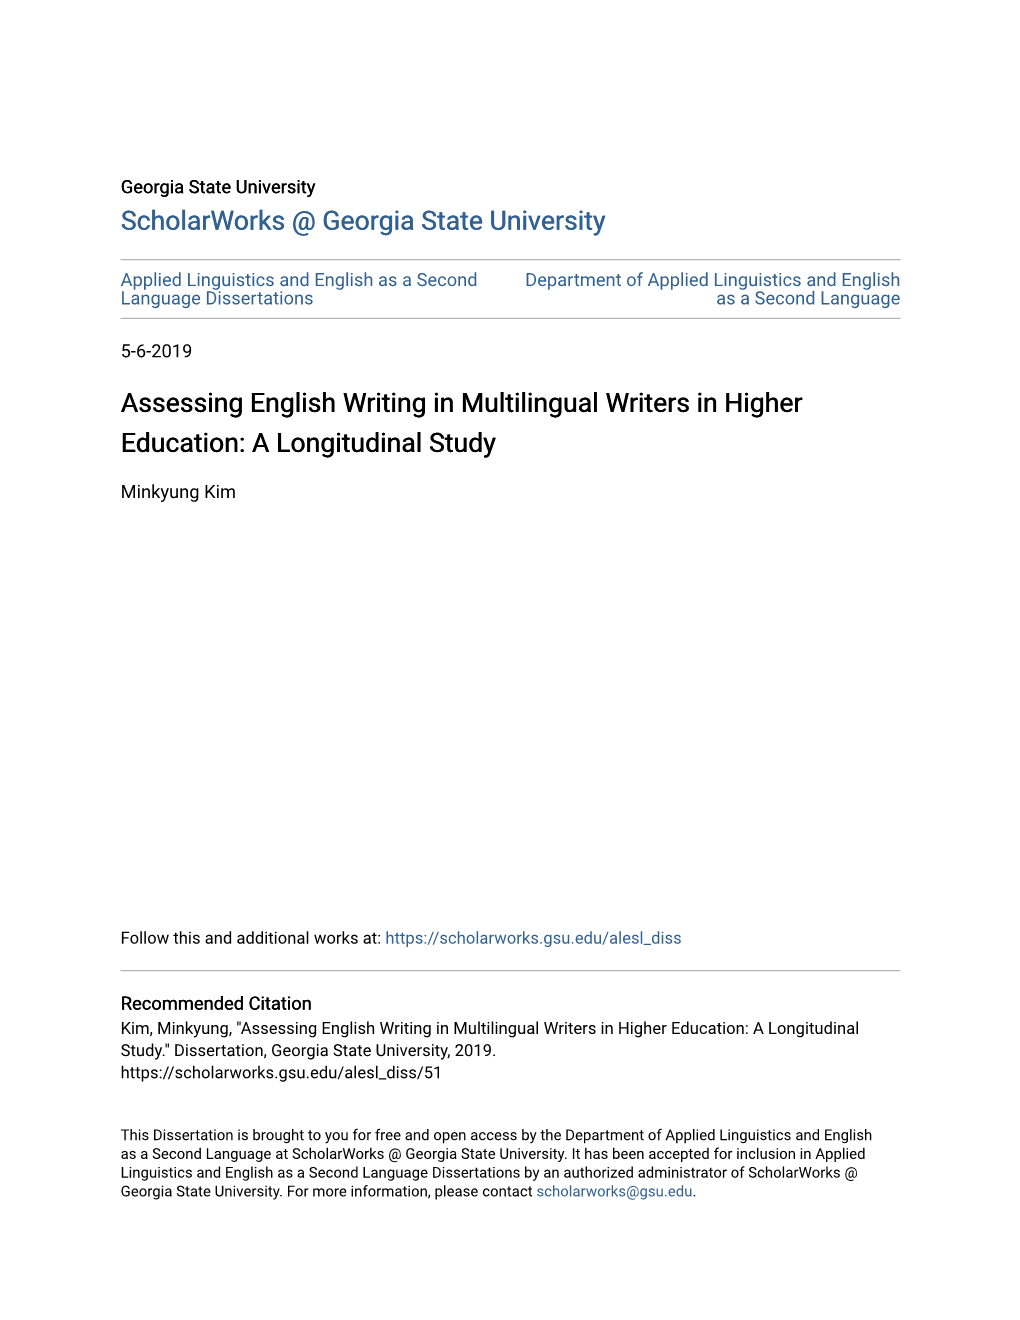 Assessing English Writing in Multilingual Writers in Higher Education: a Longitudinal Study